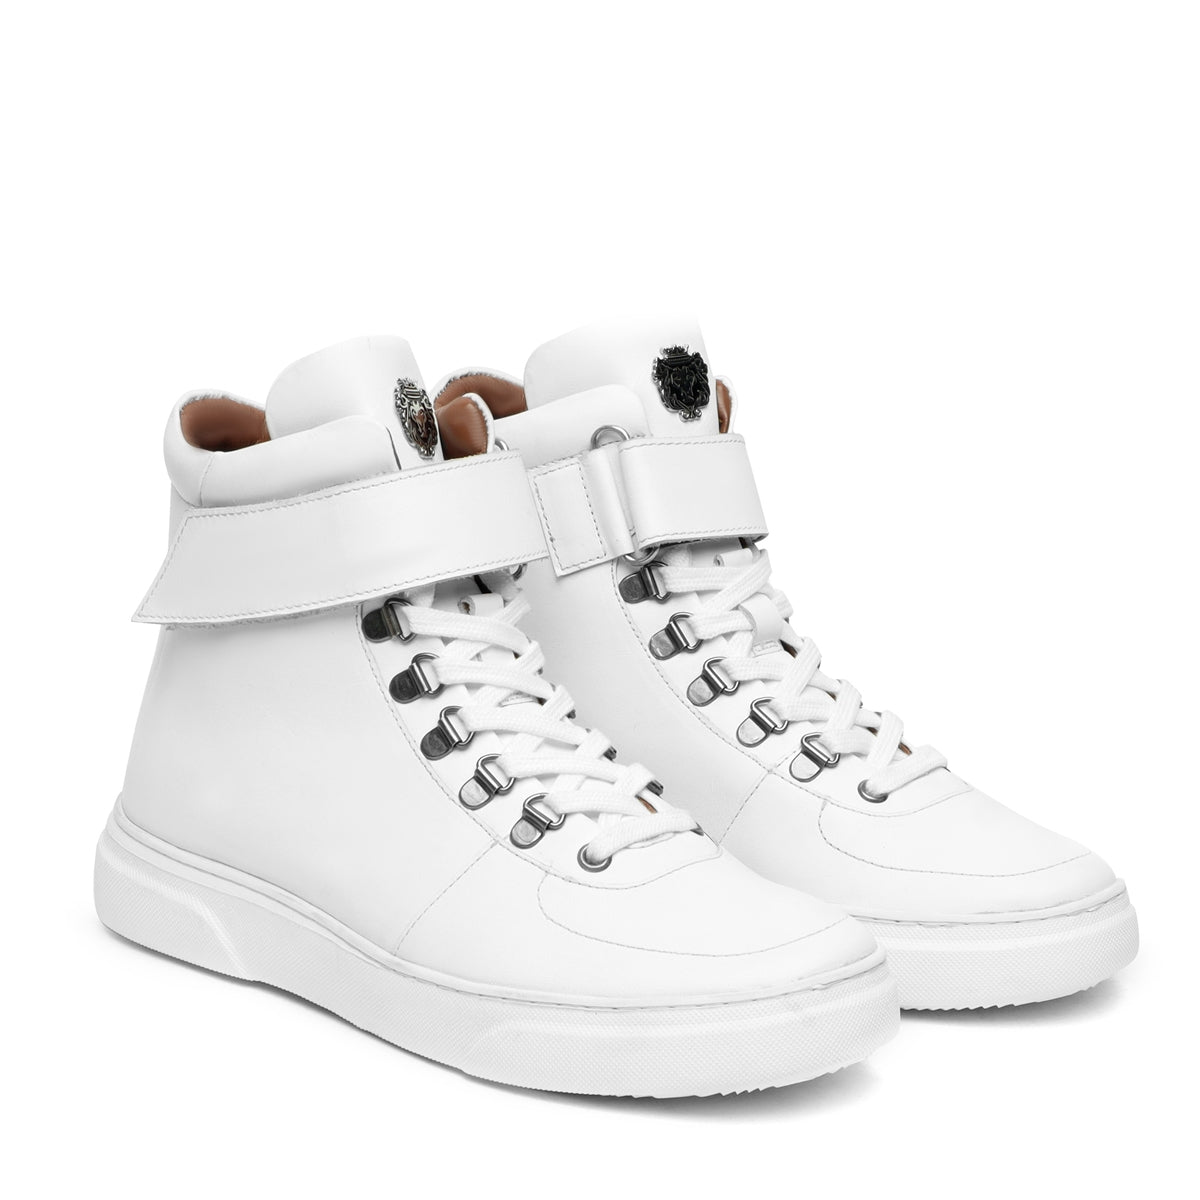 White Leather Lace Ups with Adjustable Leather Strap Mid-Top Sneakers